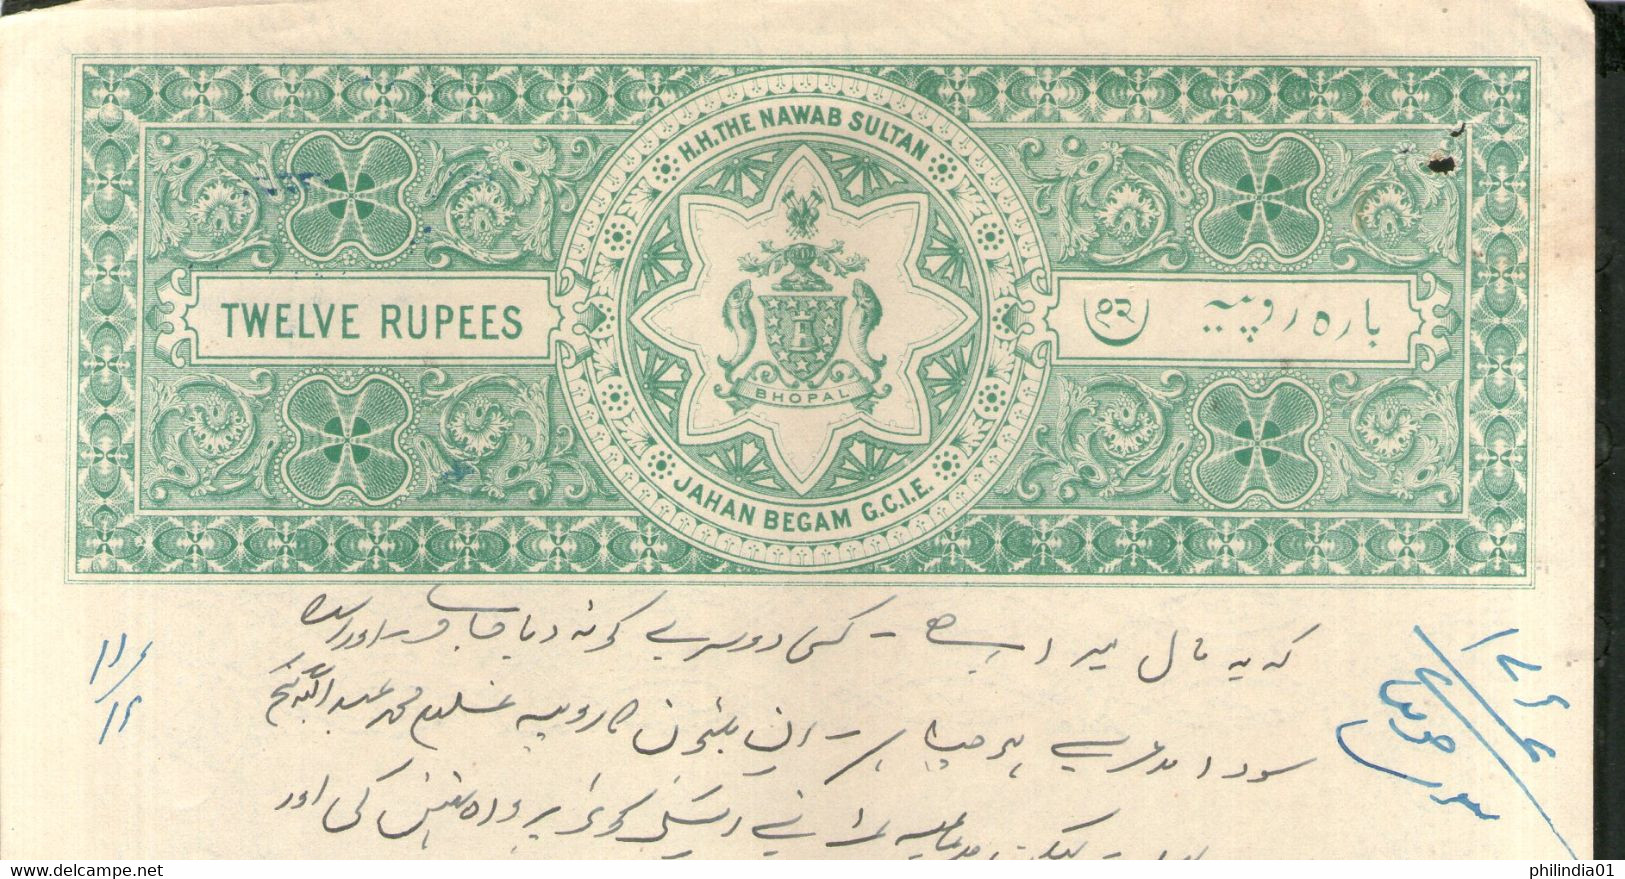 India Fiscal Bhopal State 12 Rs Stamp Paper Type 15 Revenue Court Fee # 10459A - Bhopal